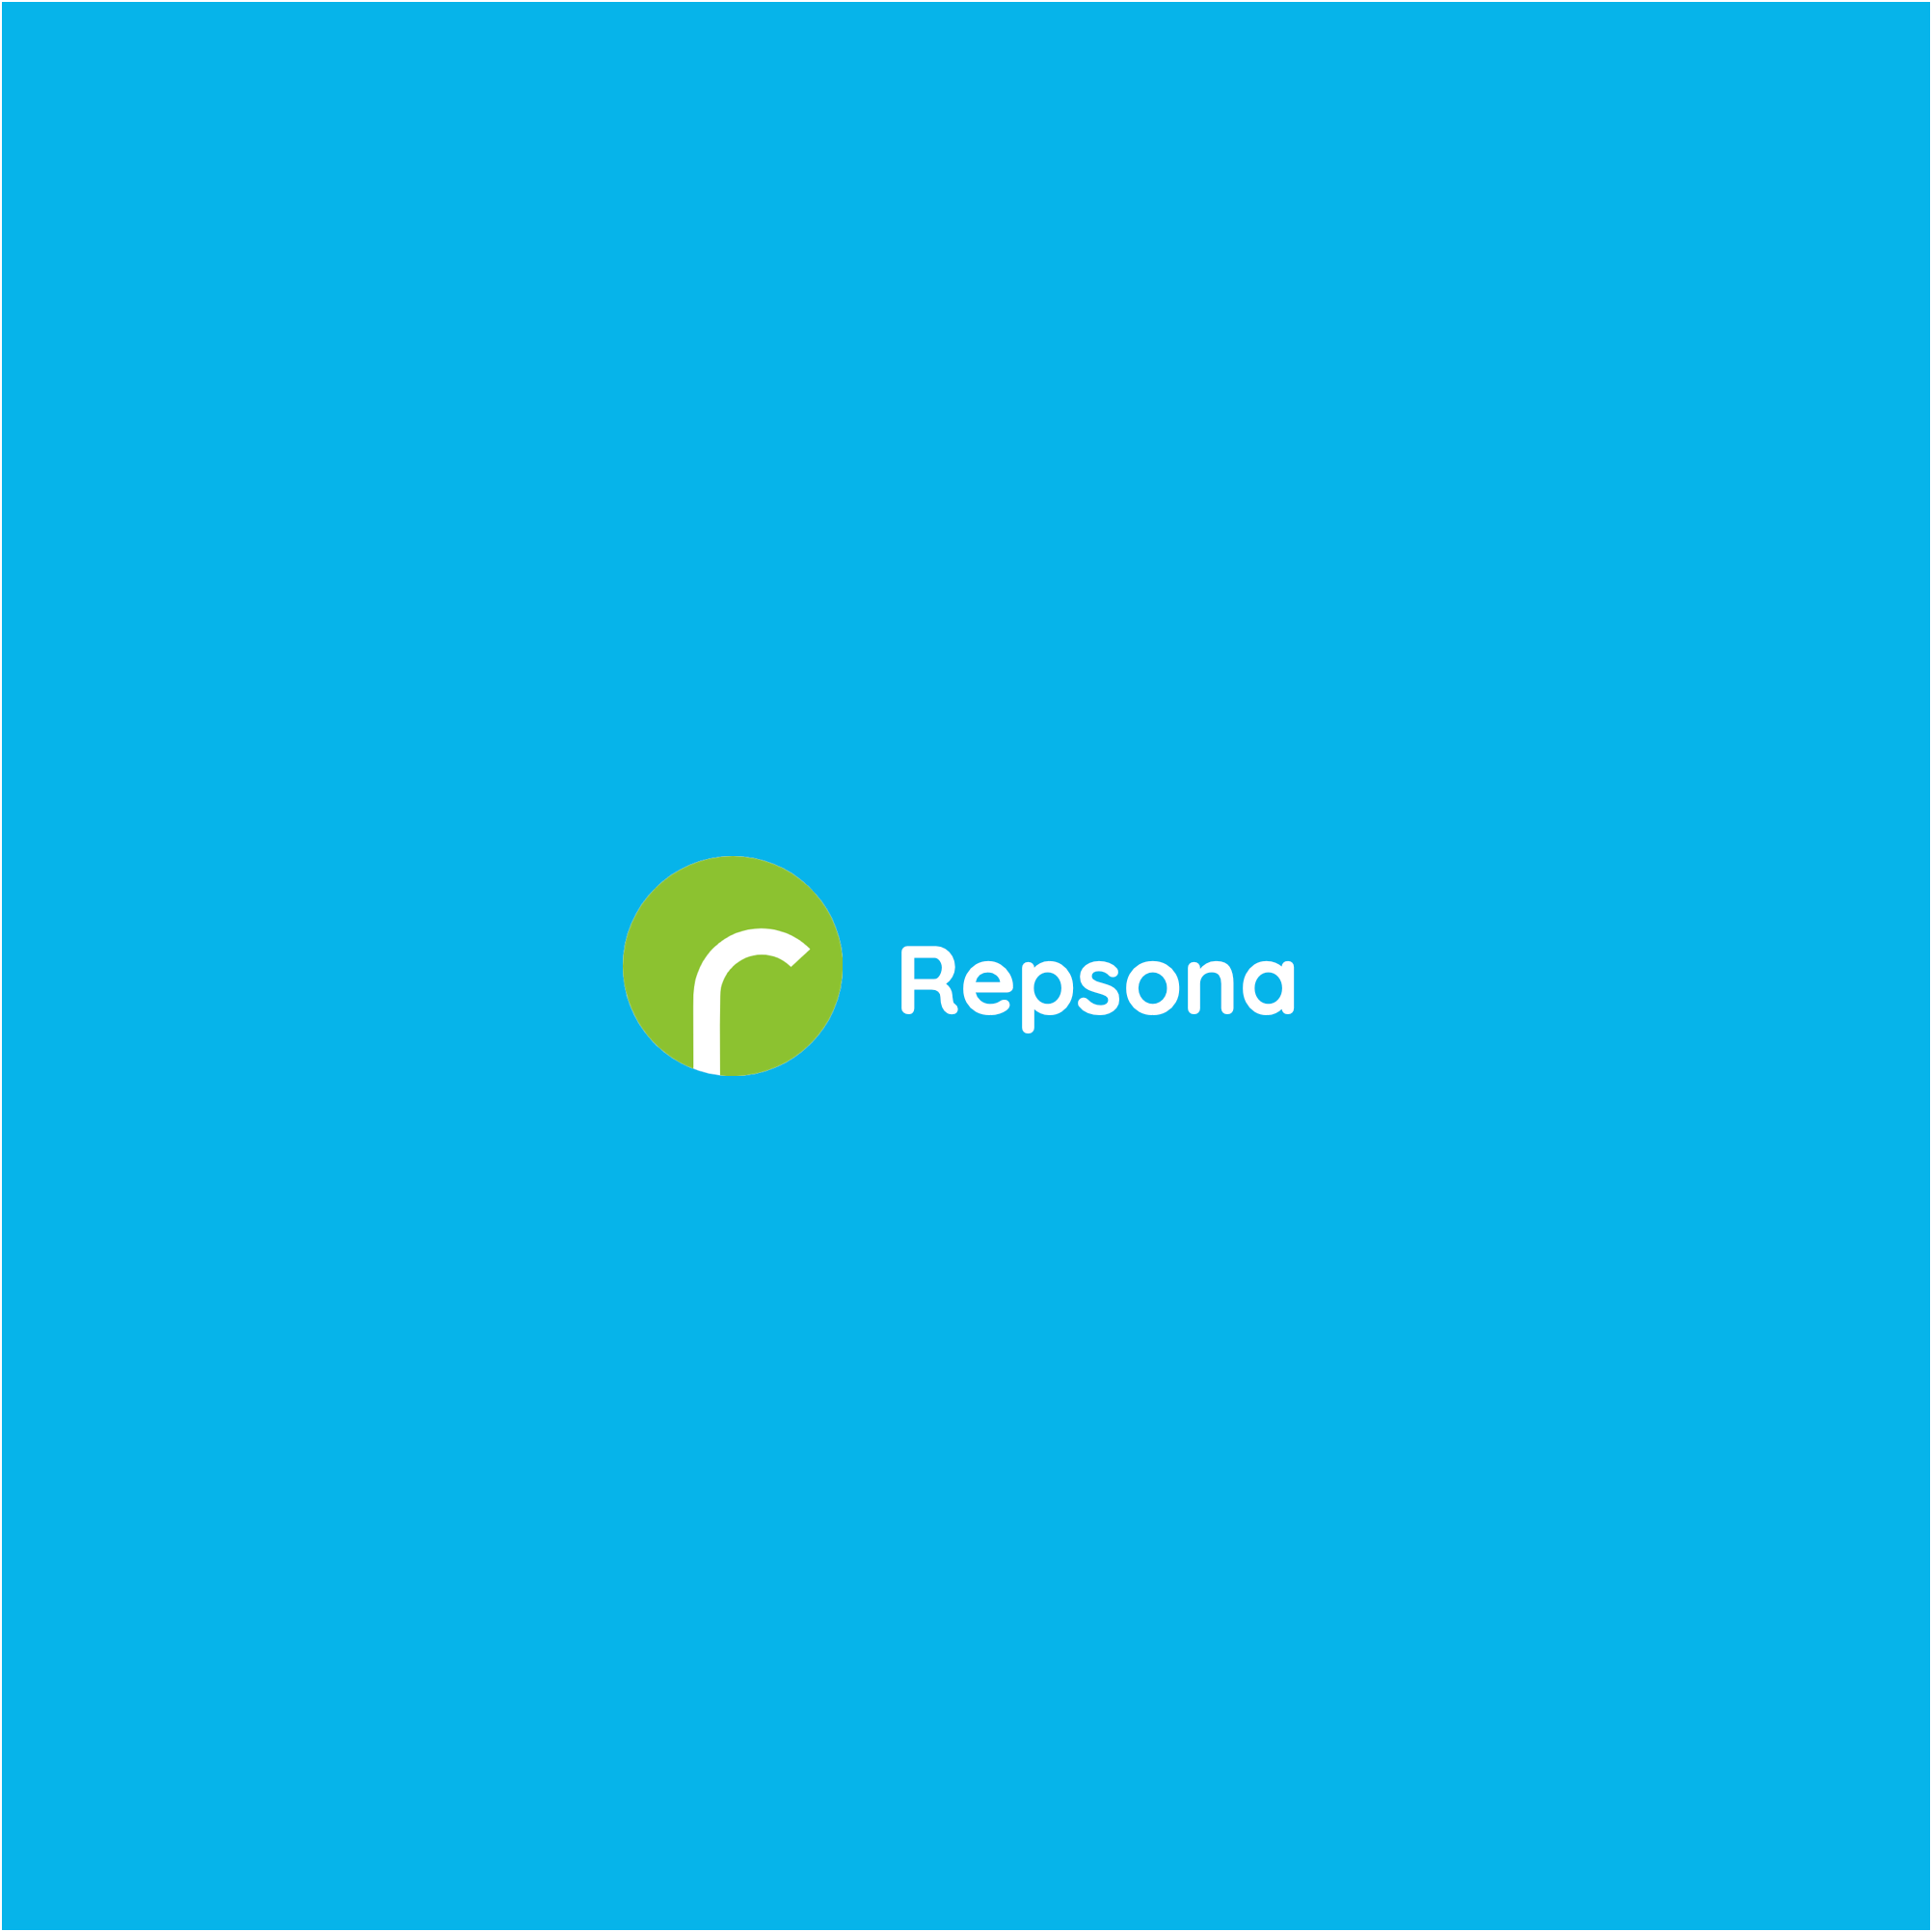 Repsona Price Revisions and Free Plan Limit Changes